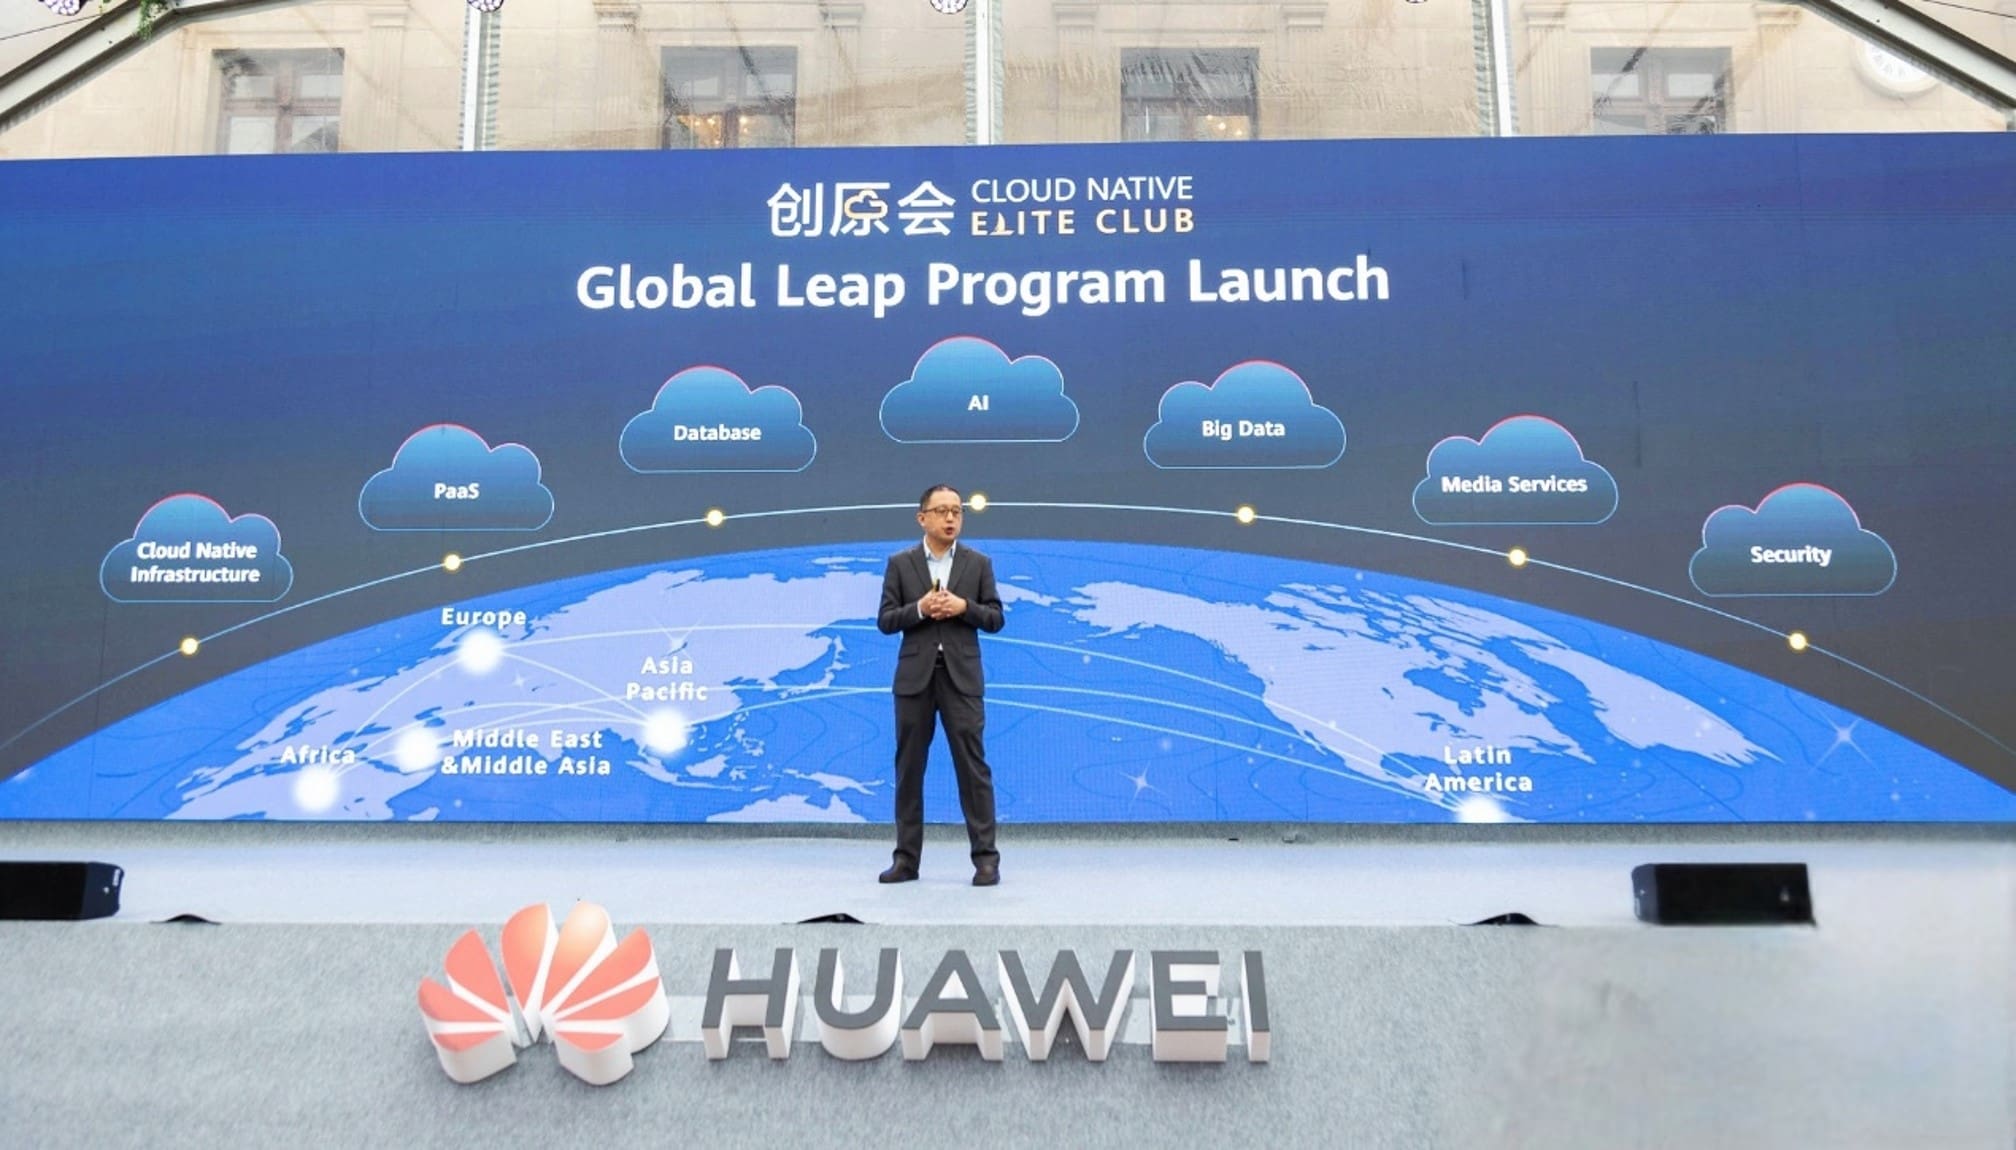 Bruno Zhang unveils the Global Leap Program by Cloud Native Elite Club